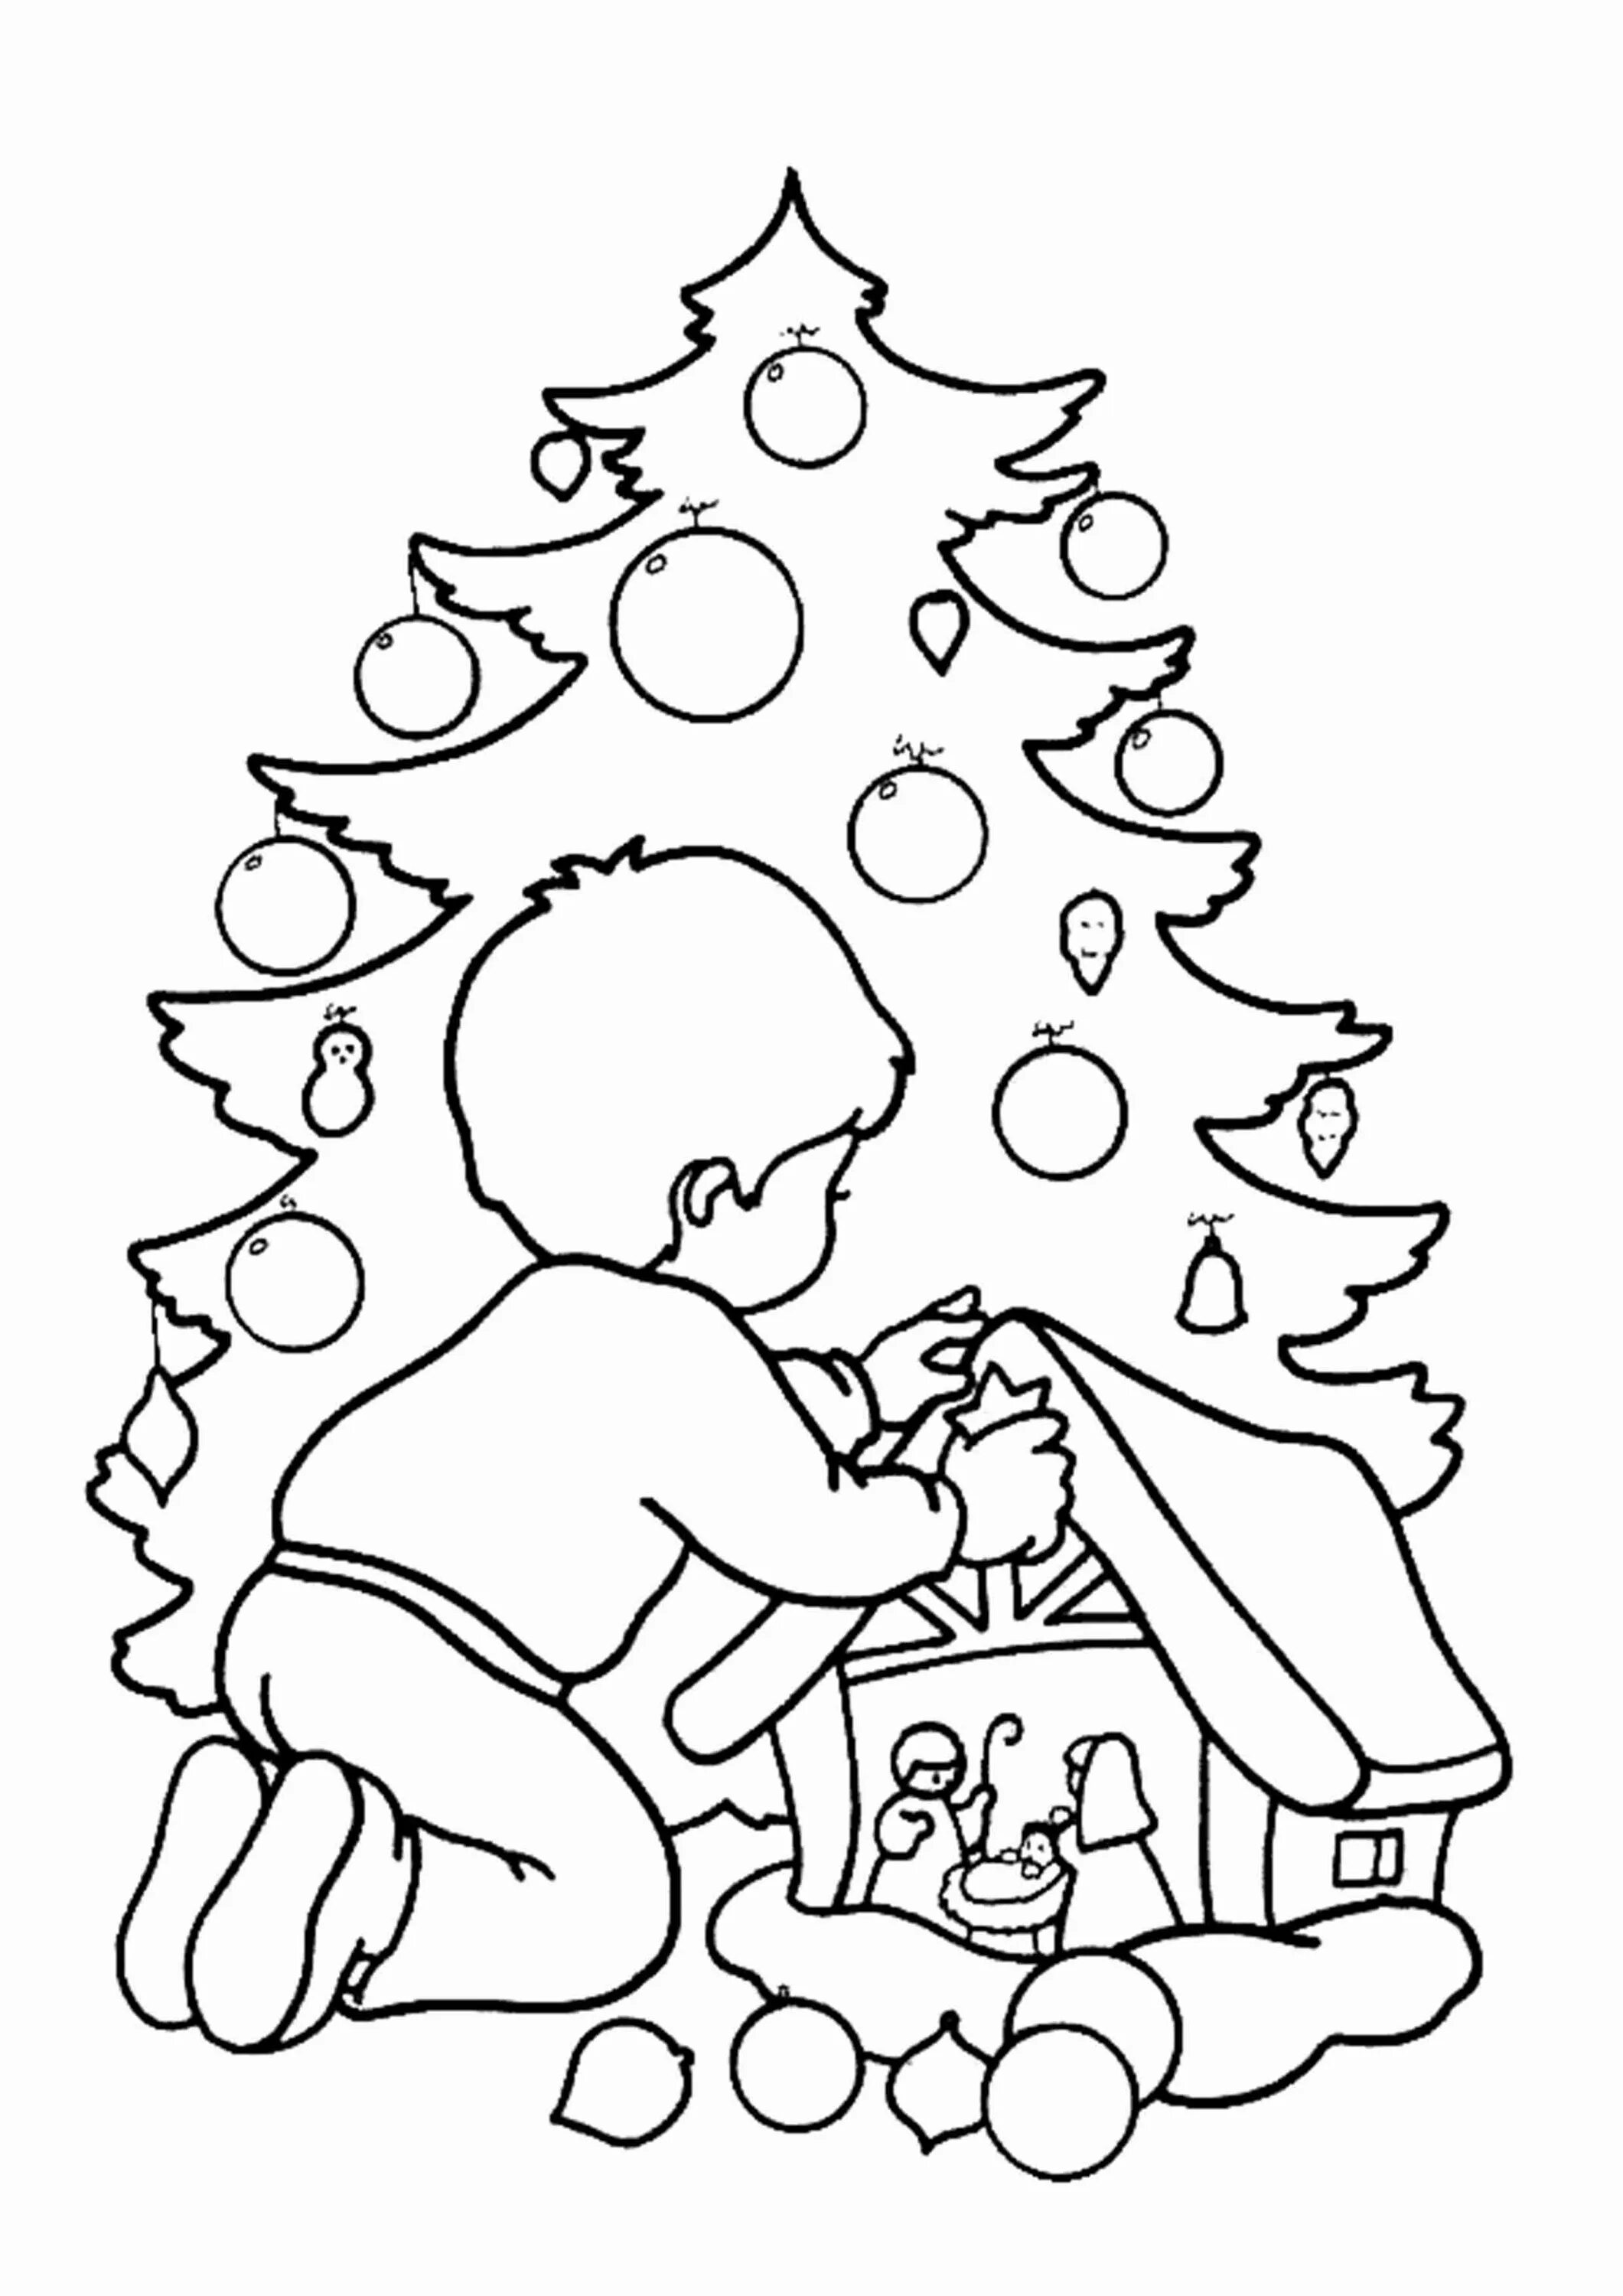 Glowing Christmas family coloring book